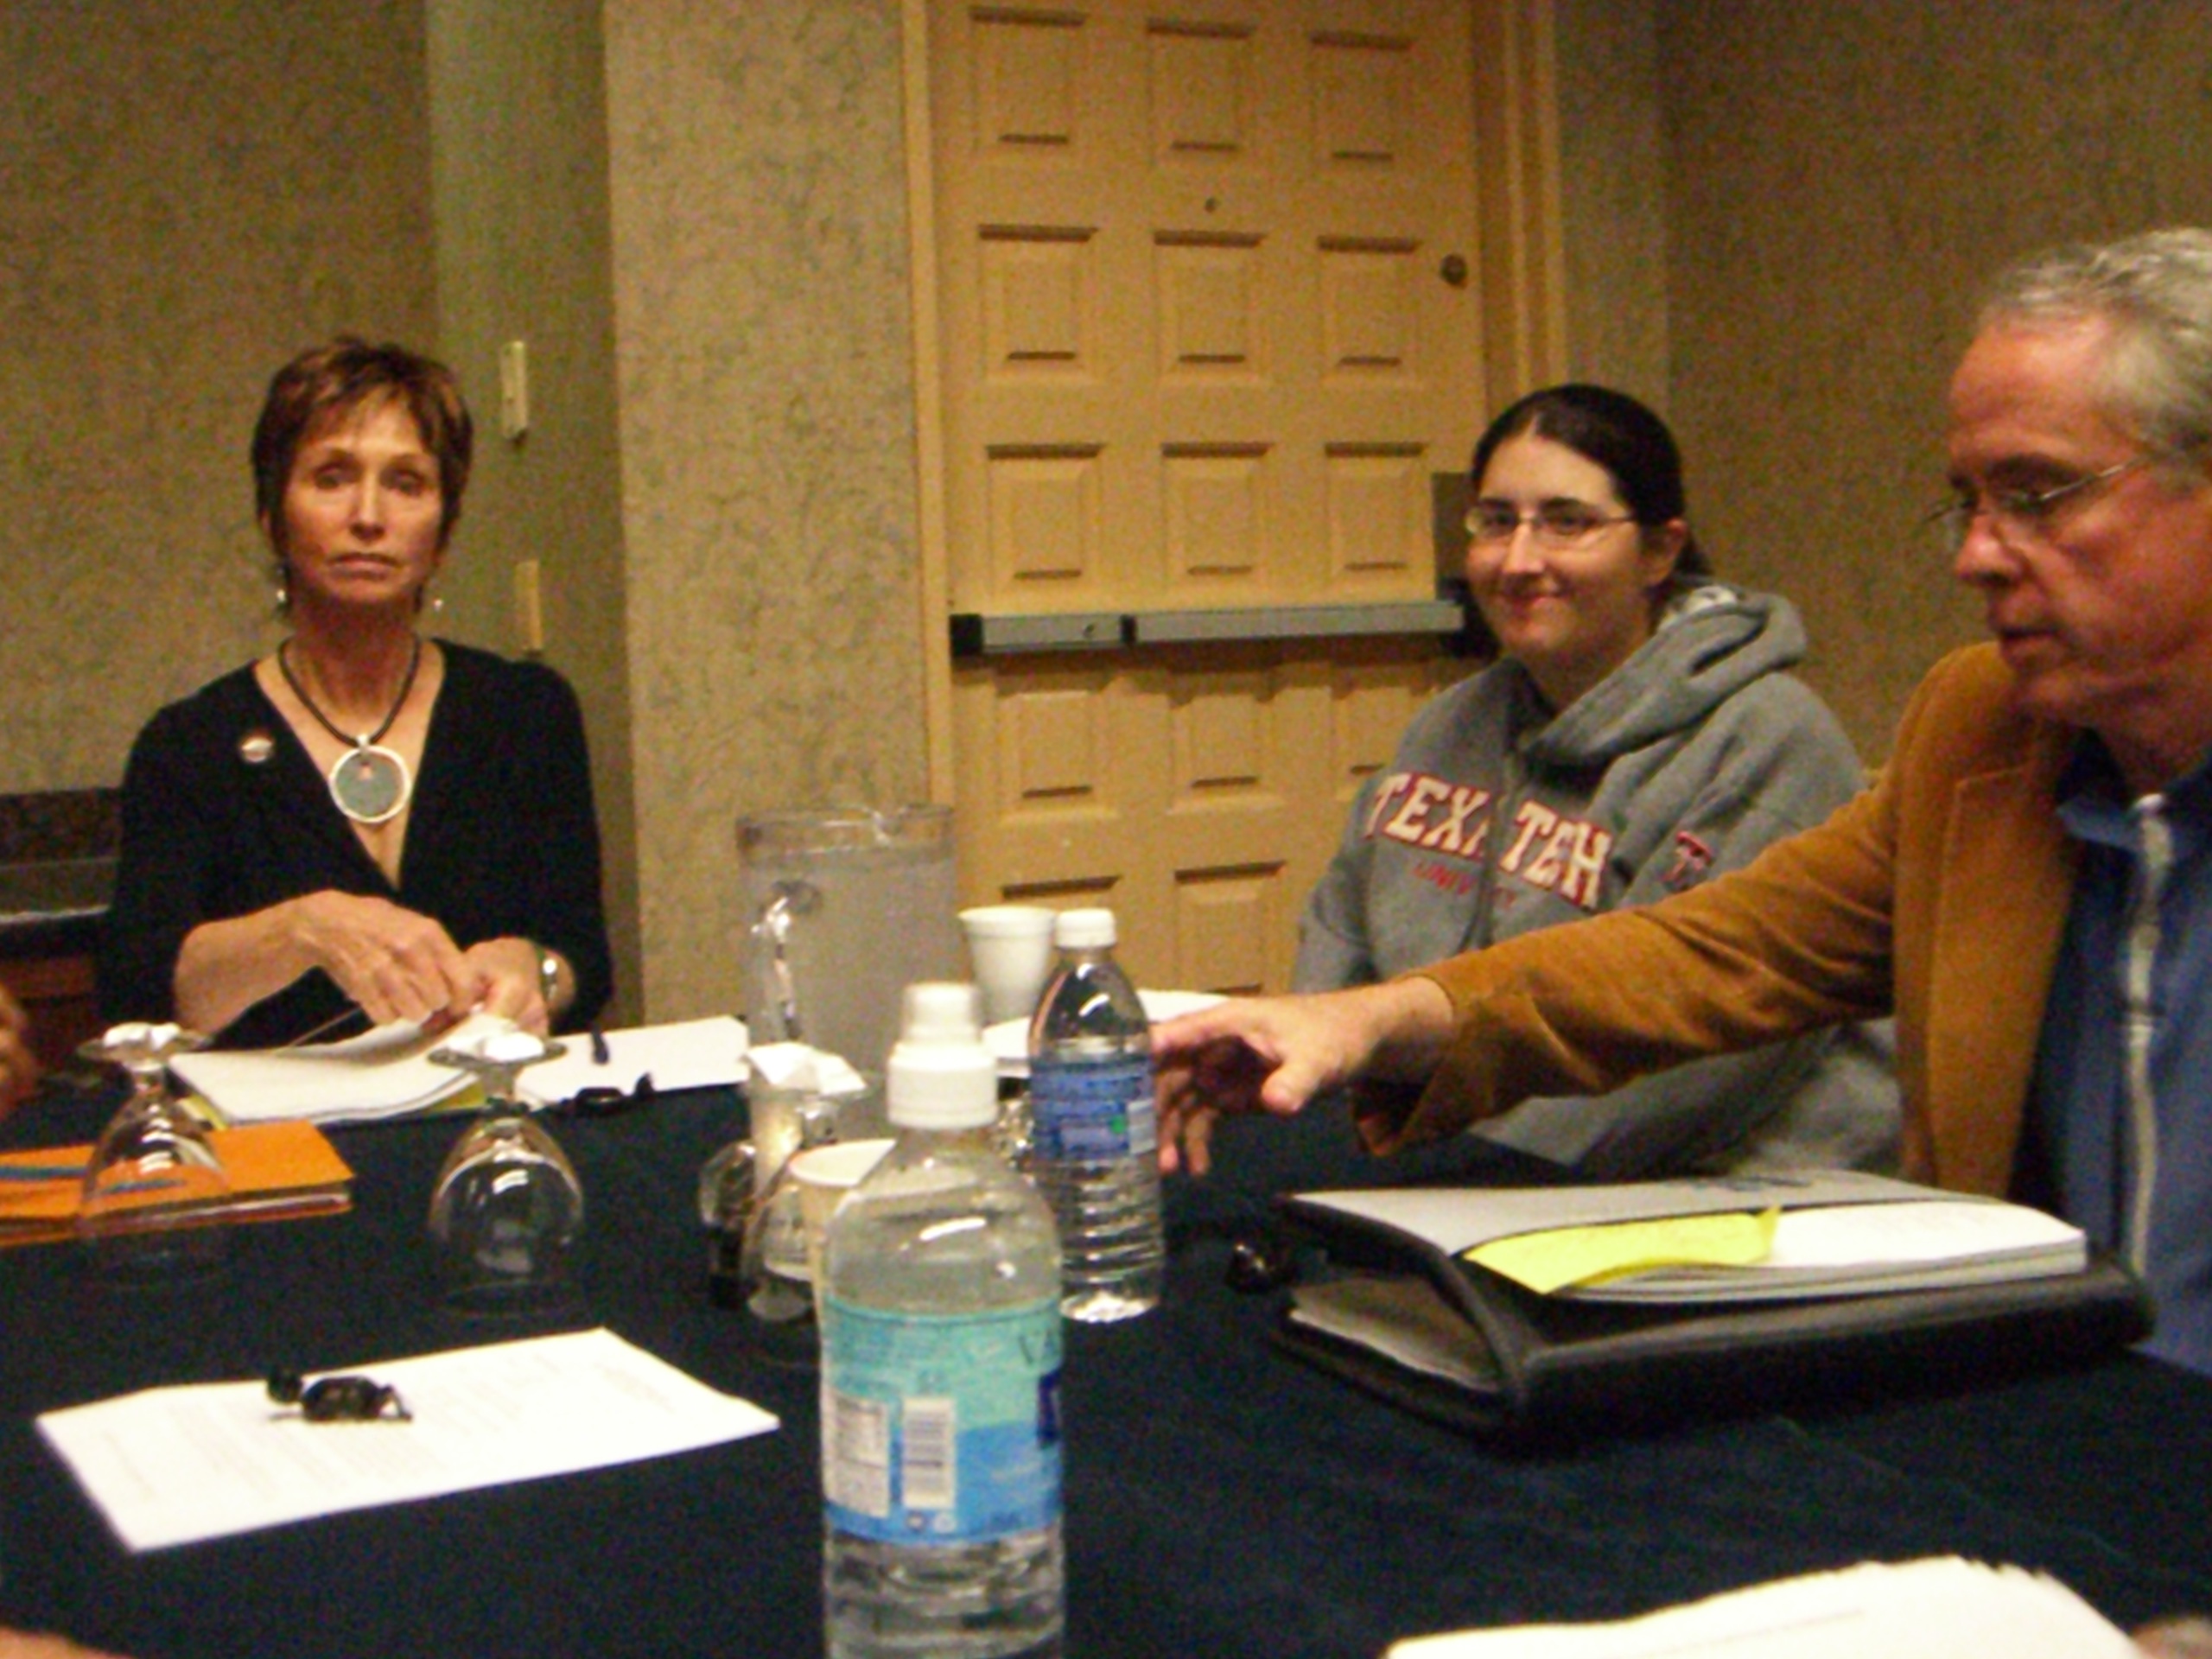 Author Louise Marley (instructor) and two students in our critique group at the ArmadilloCon 2007 writers workshop